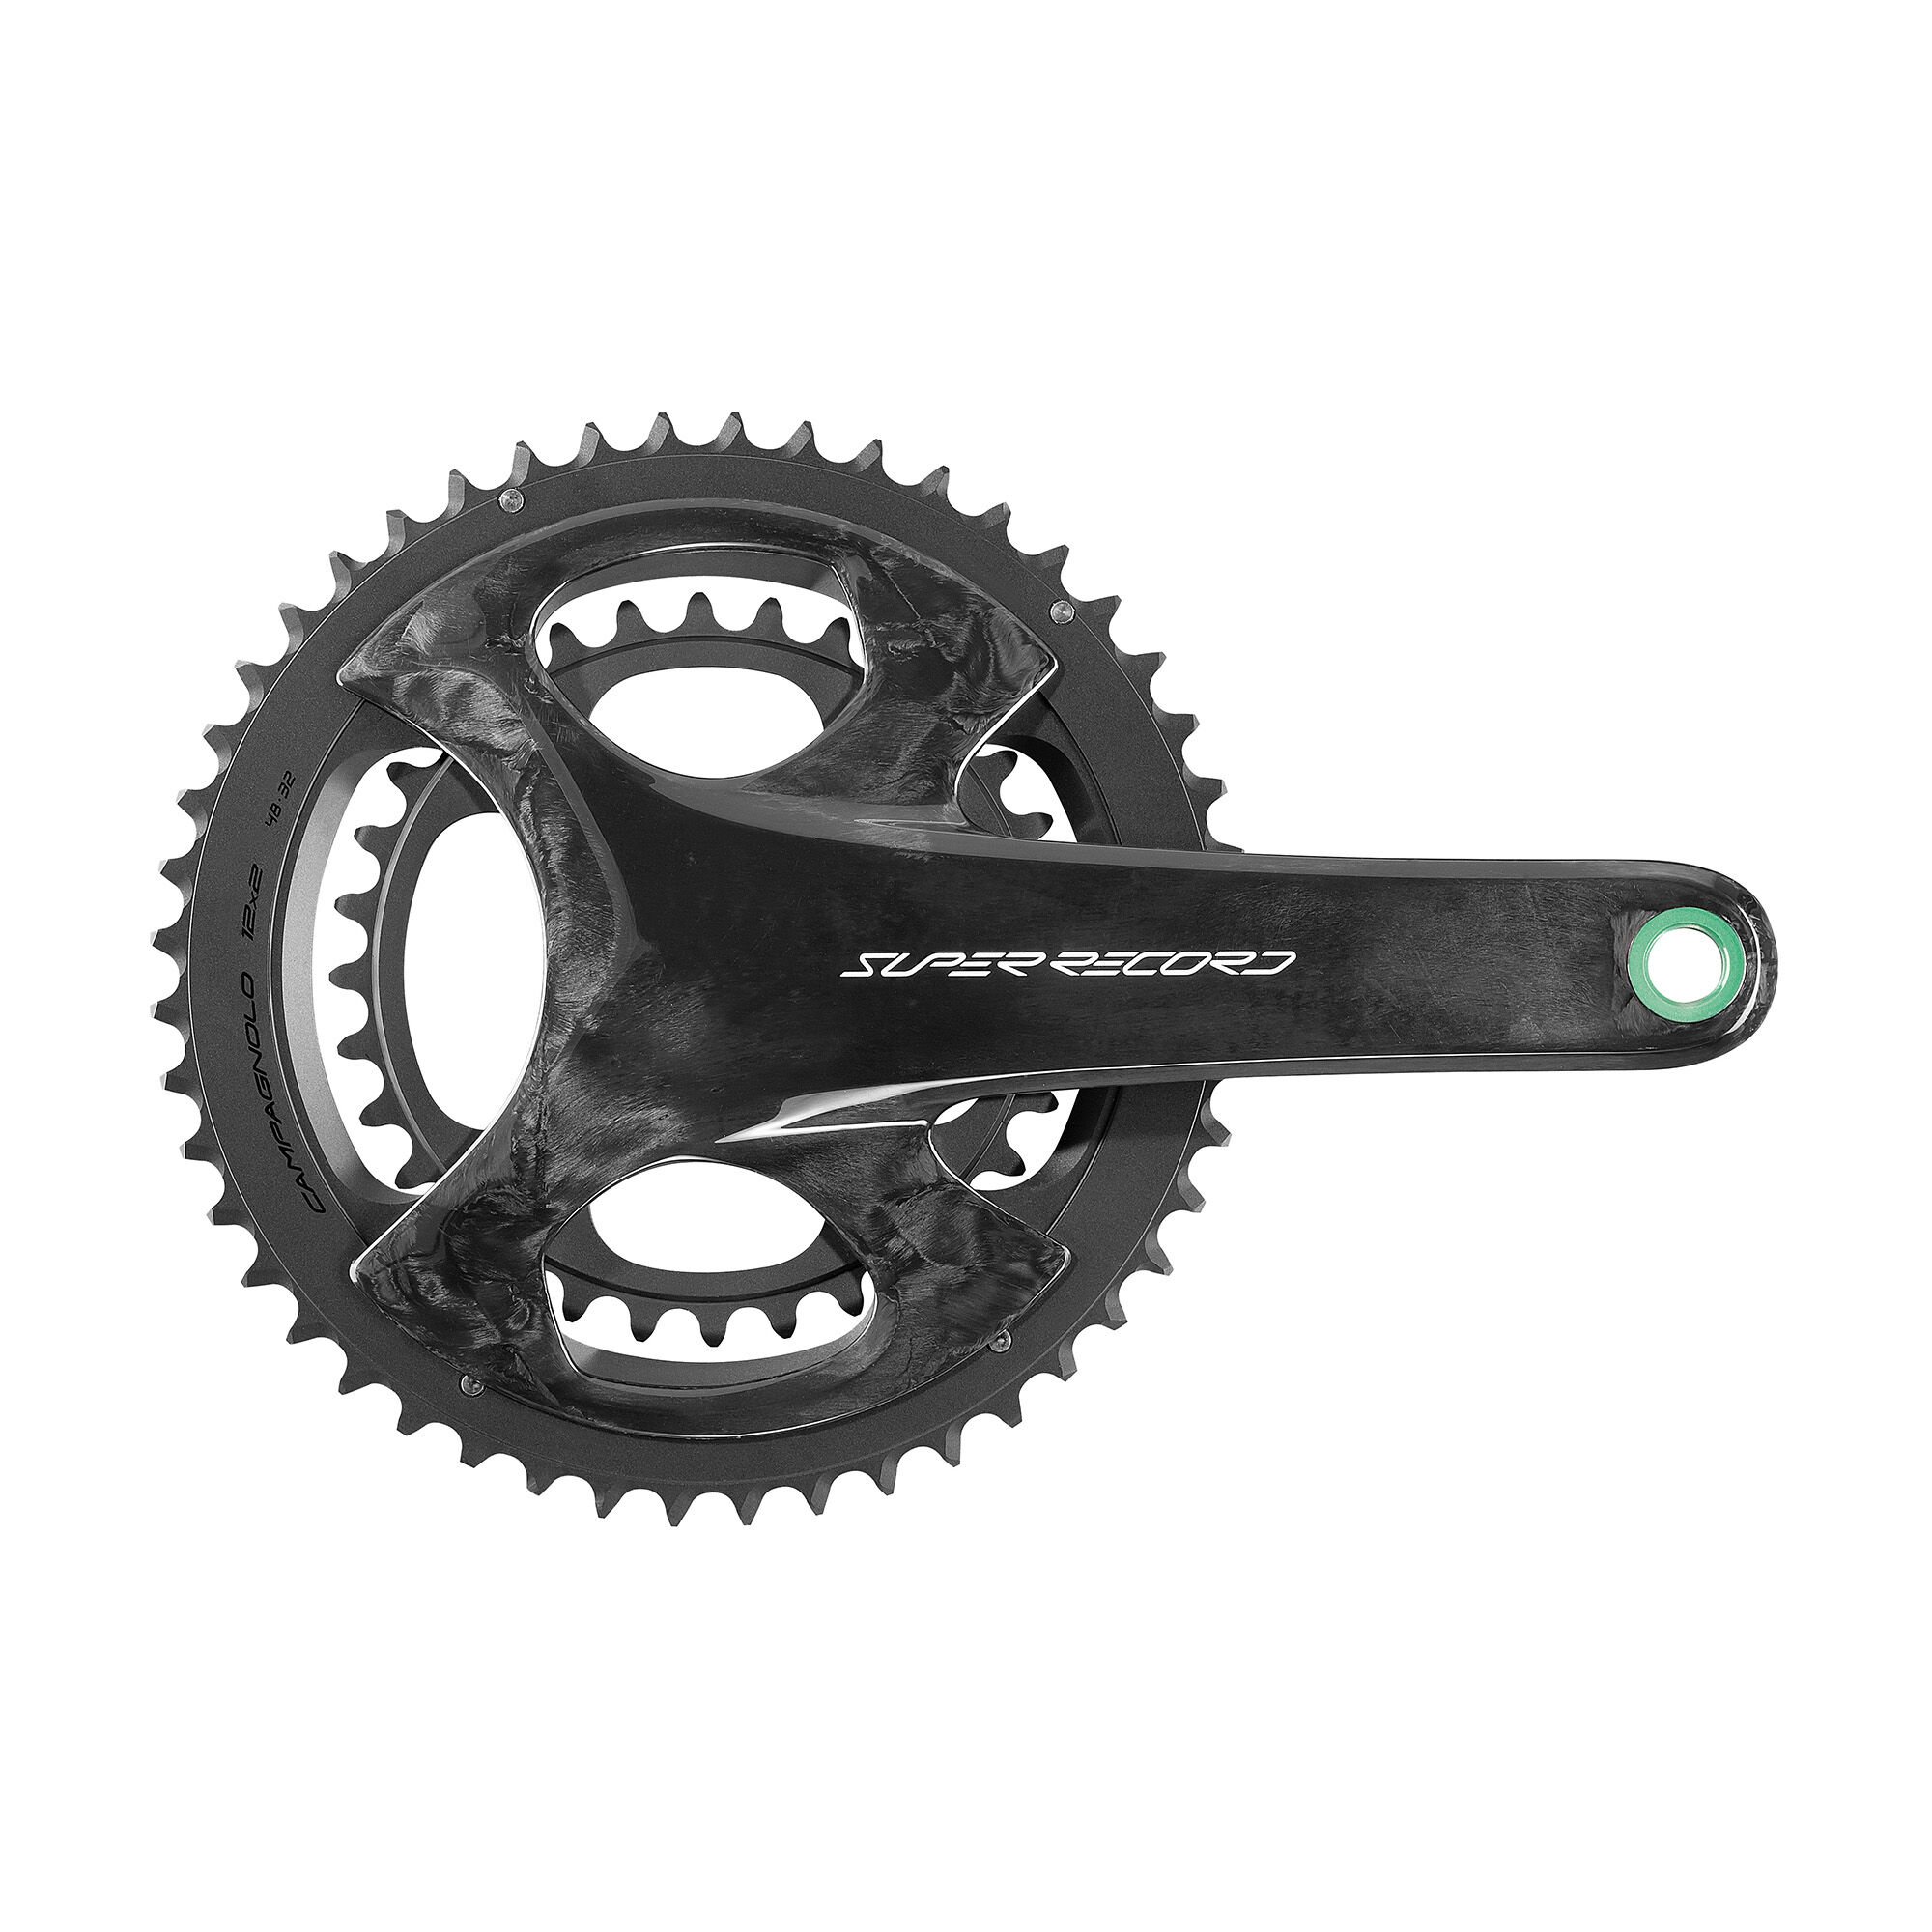 Super Record wireless groupset | Campagnolo